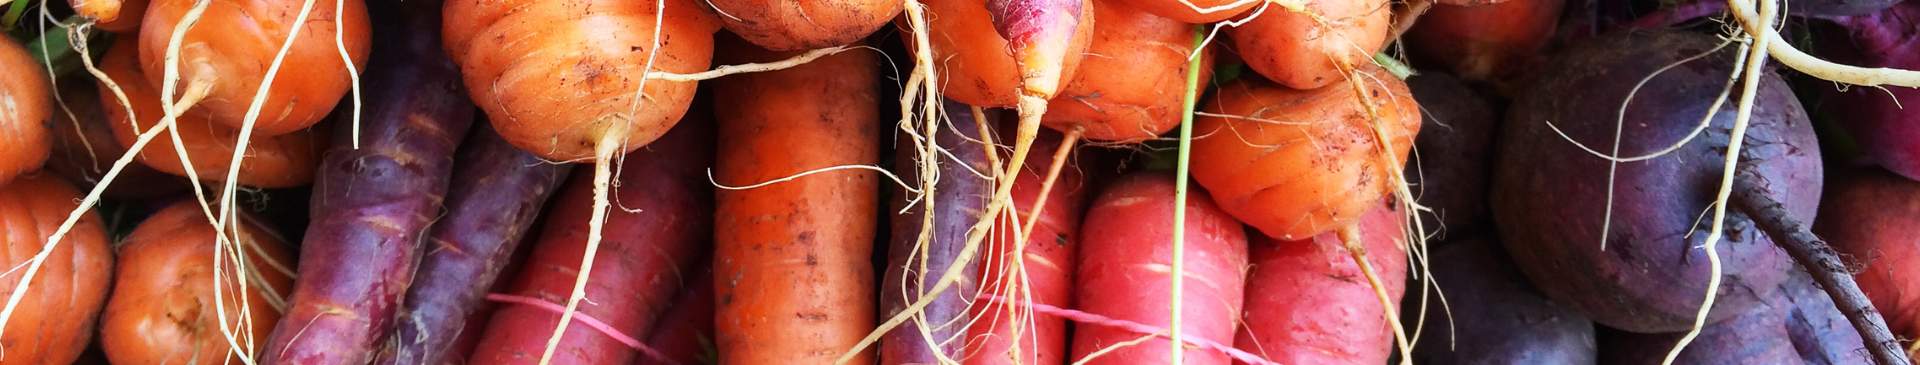 Troubleshooting: Radish, Beetroot and Other Veggies Not Forming Roots